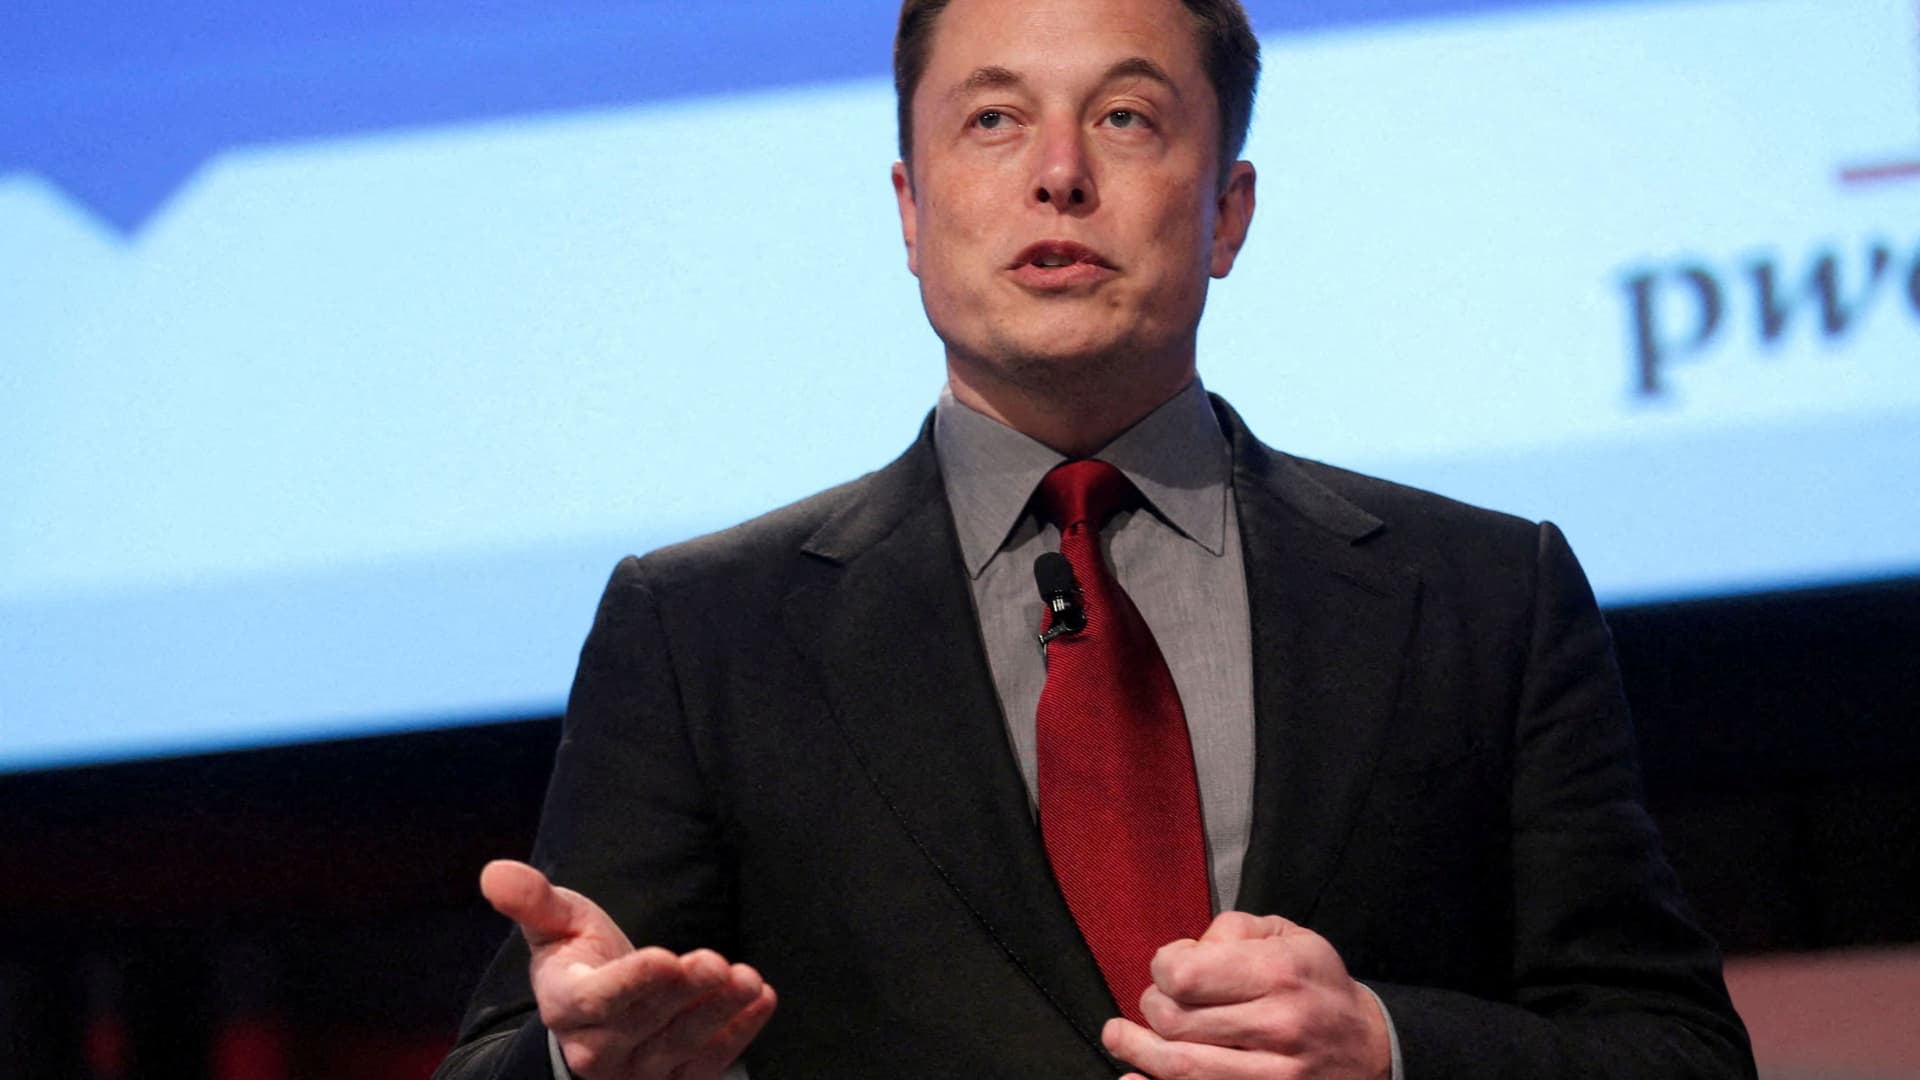 Elon Musk expected to serve as temporary Twitter CEO after deal closes – CNBC